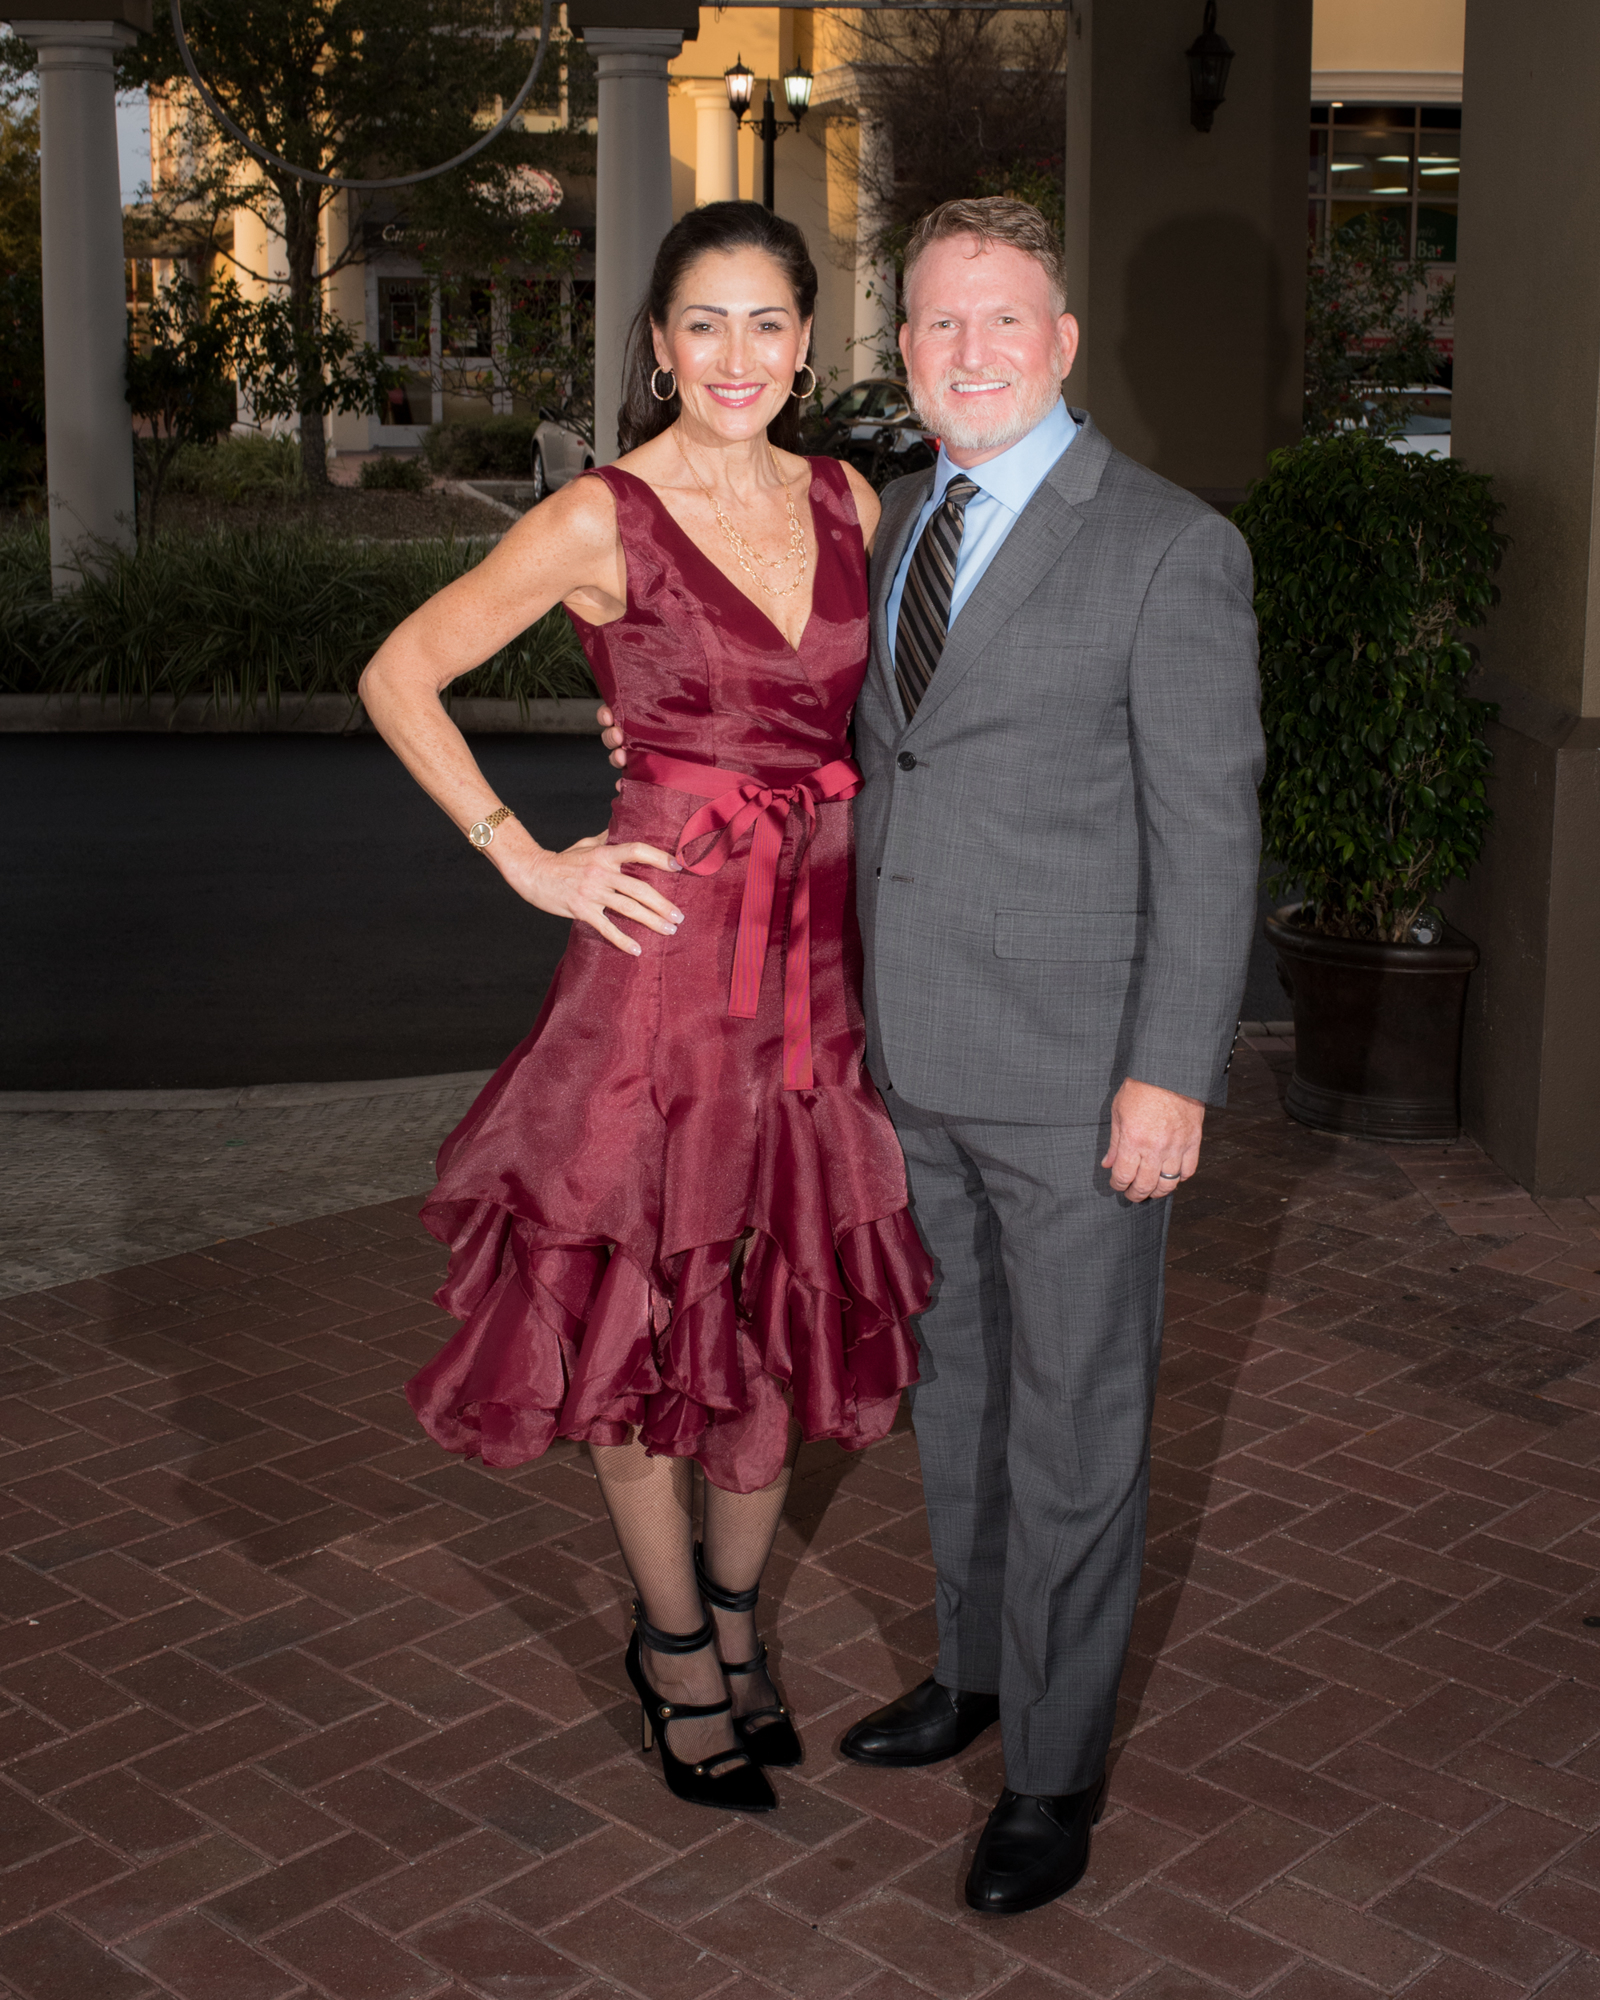 Terri Prechtl and Chairman Brad Prechtl, honorees of Party Under the Stars